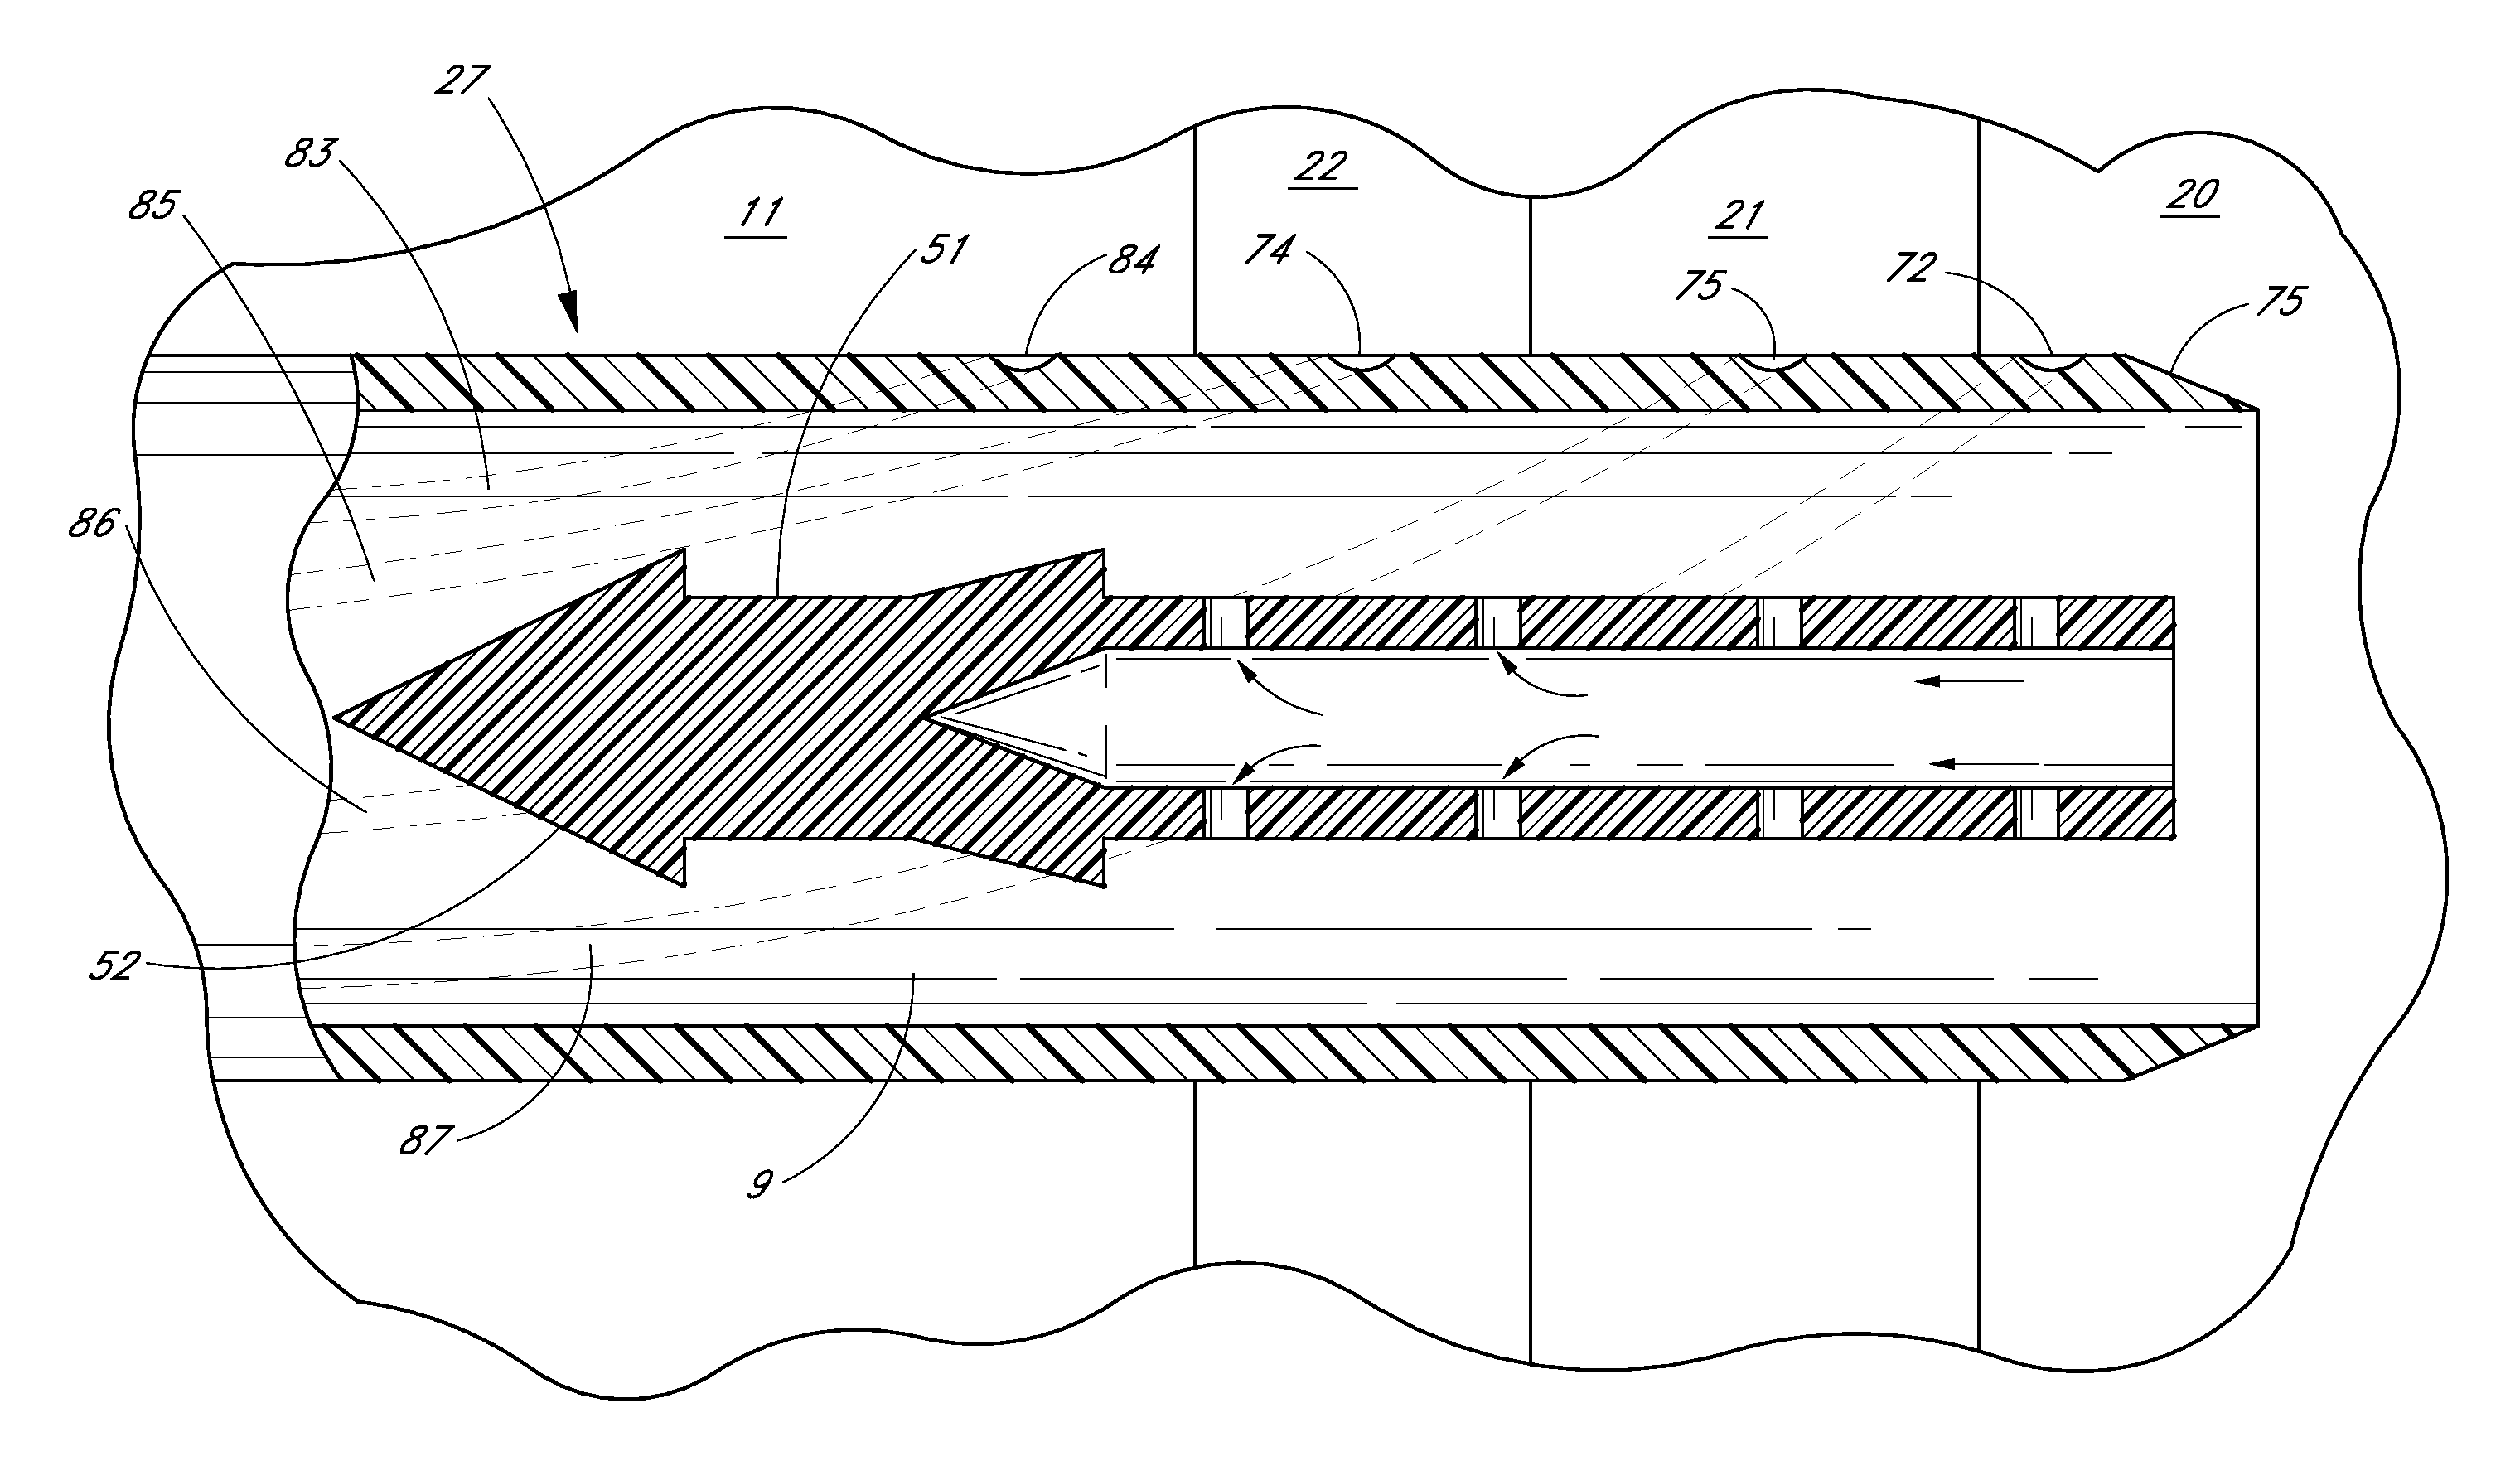 Ocular implant with anchoring mechanism and multiple outlets